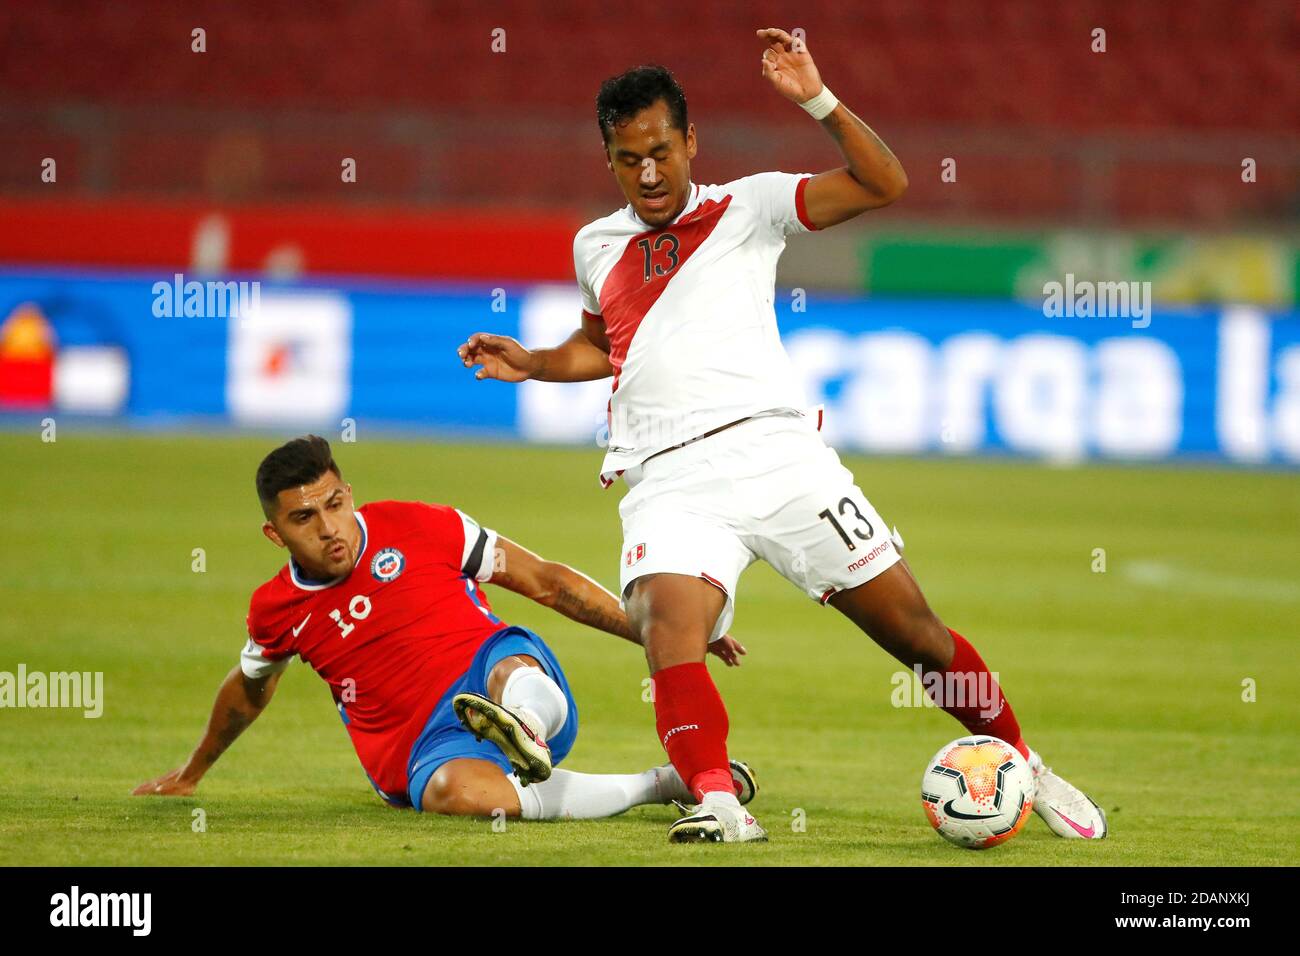 13th November 2020; National Stadium of Santiago, Santiago, Chile; World Cup 2020 Football qualification, Chile versus Peru;  Cesar Pinares of Chile slides in on Renato Tapia of Peru Stock Photo